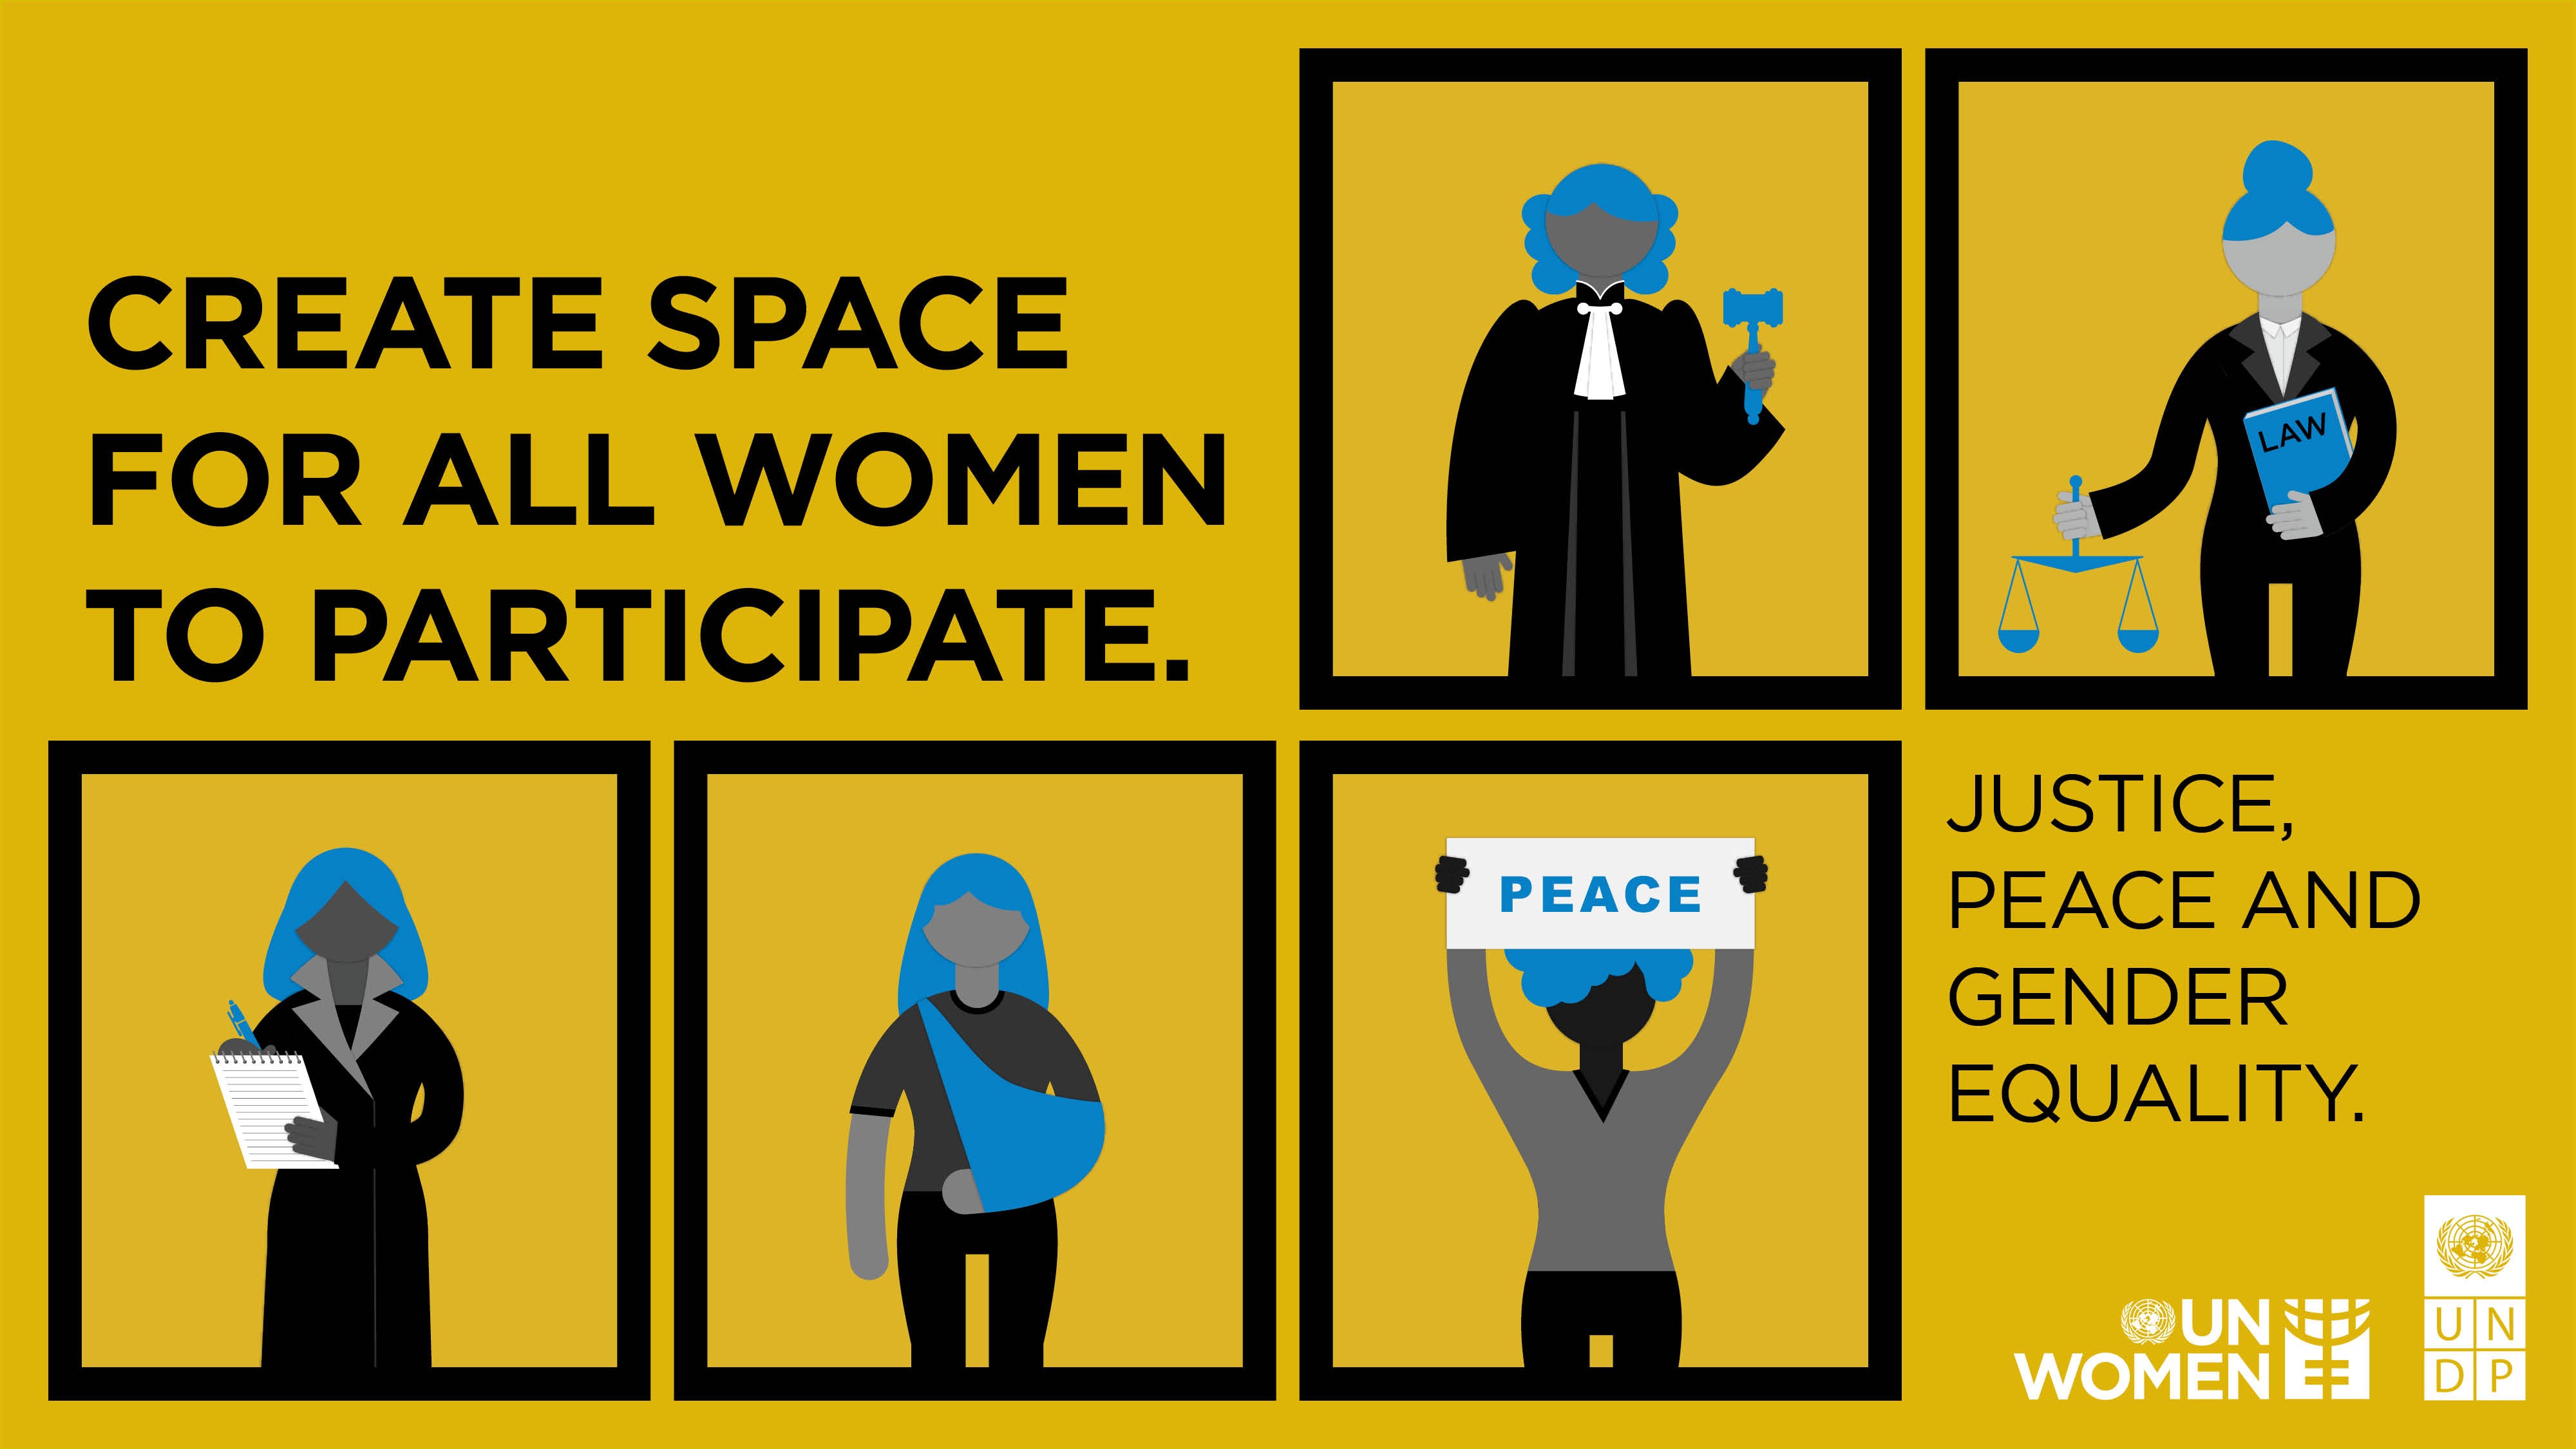 Access to justice for women and girls: UNDP and UN Women launched the  Gender Justice Platform